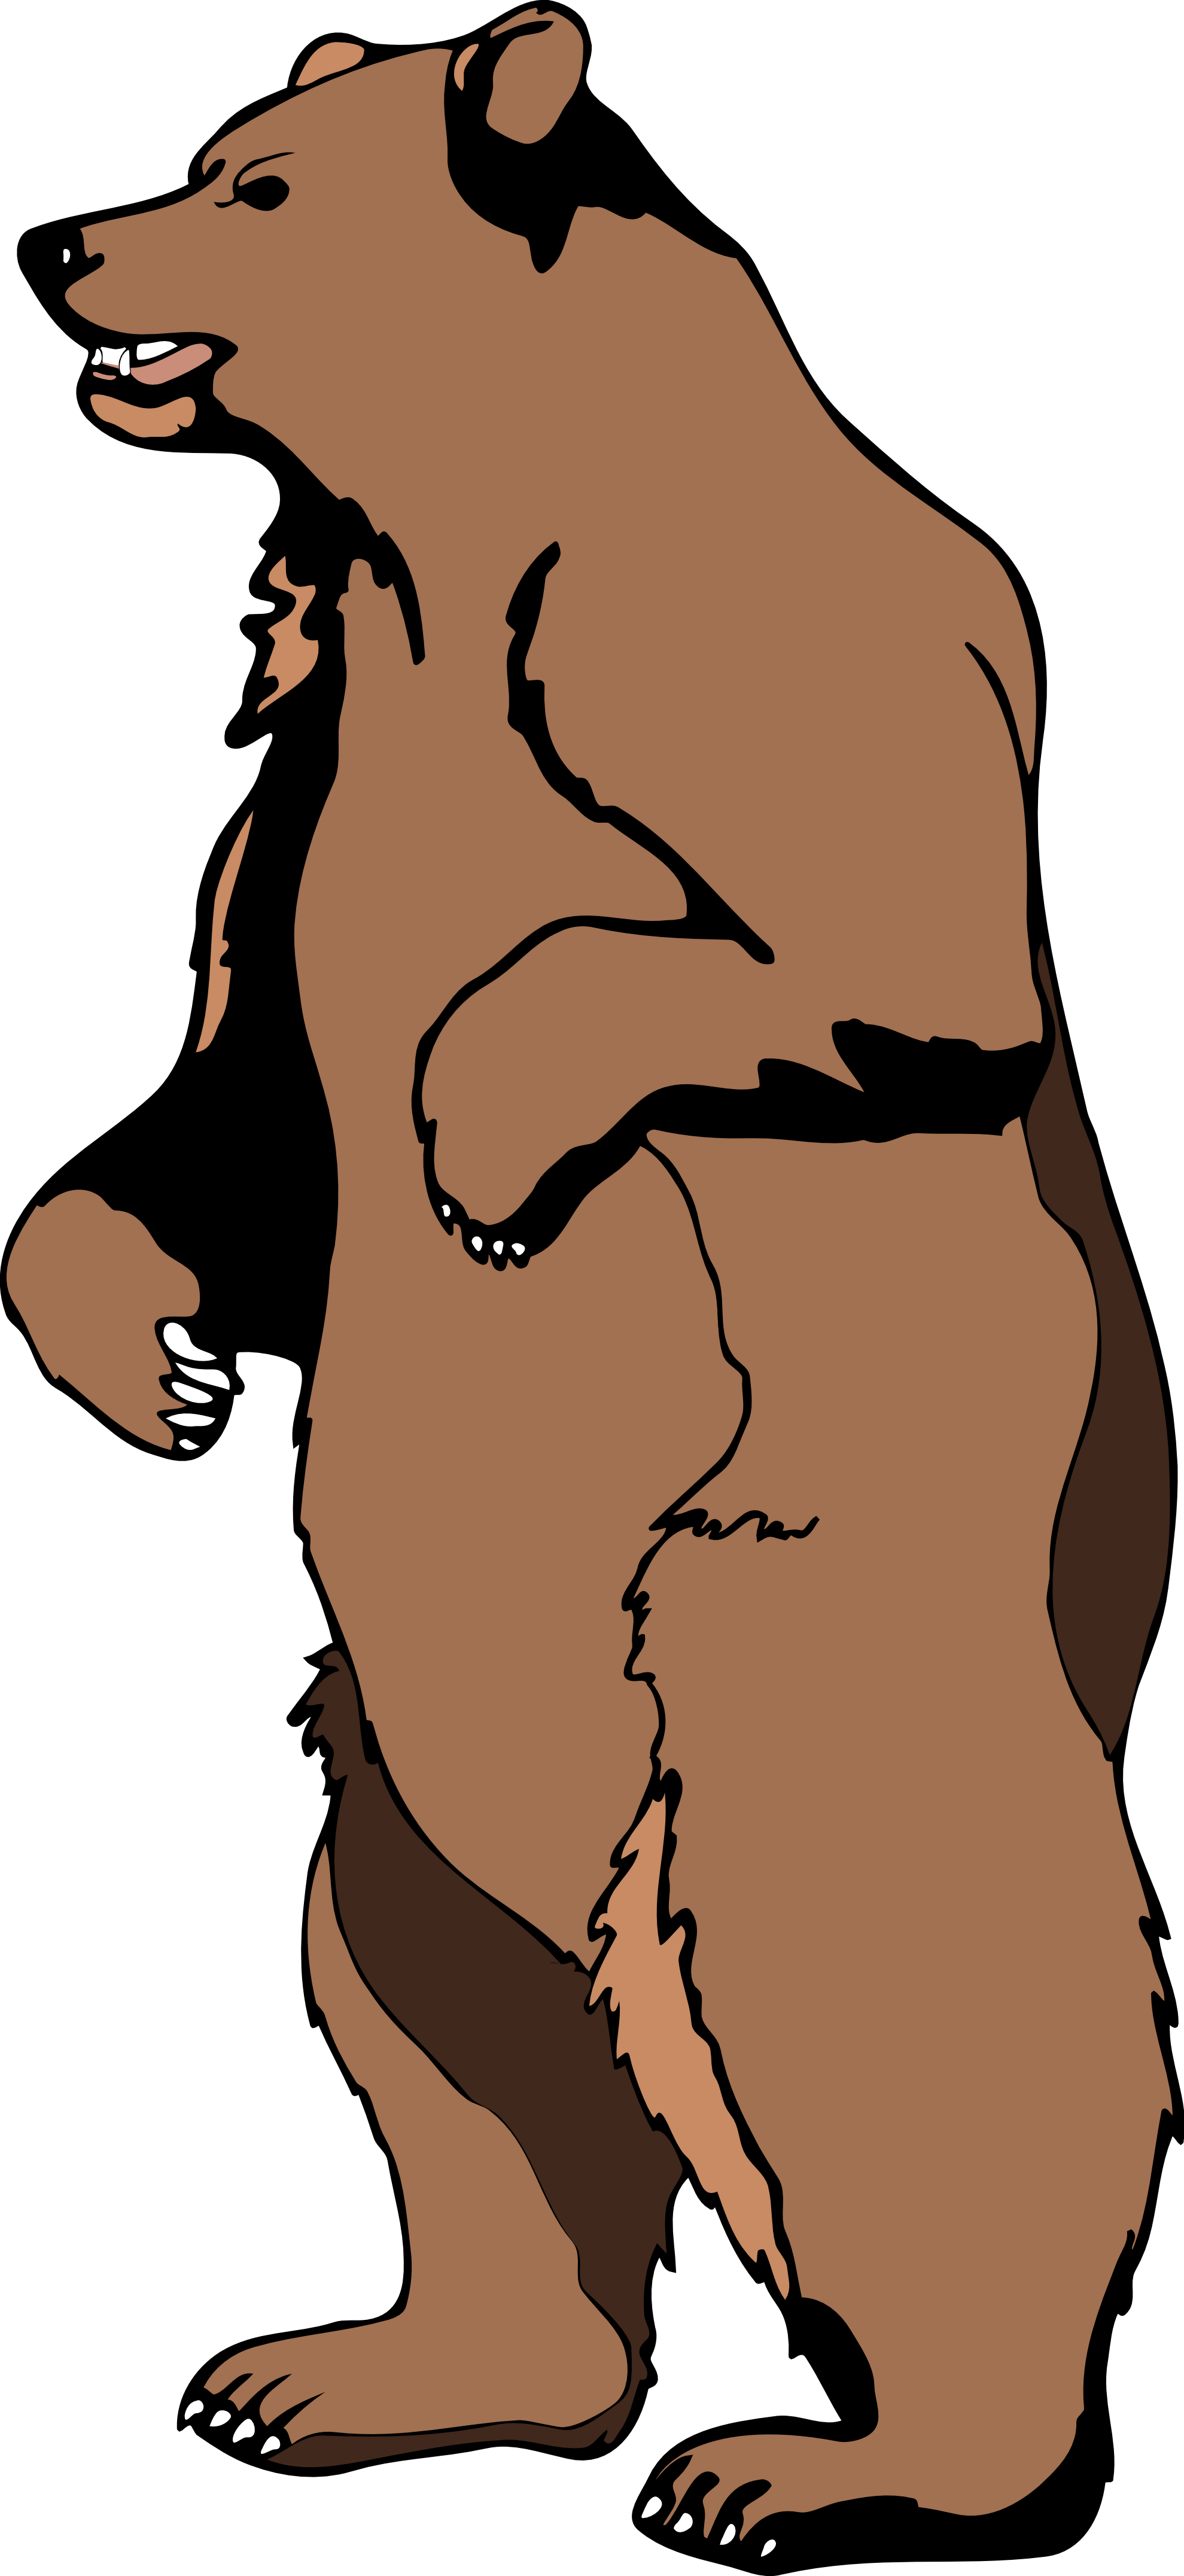 Standing bear clipart free clipart images - Clipartix